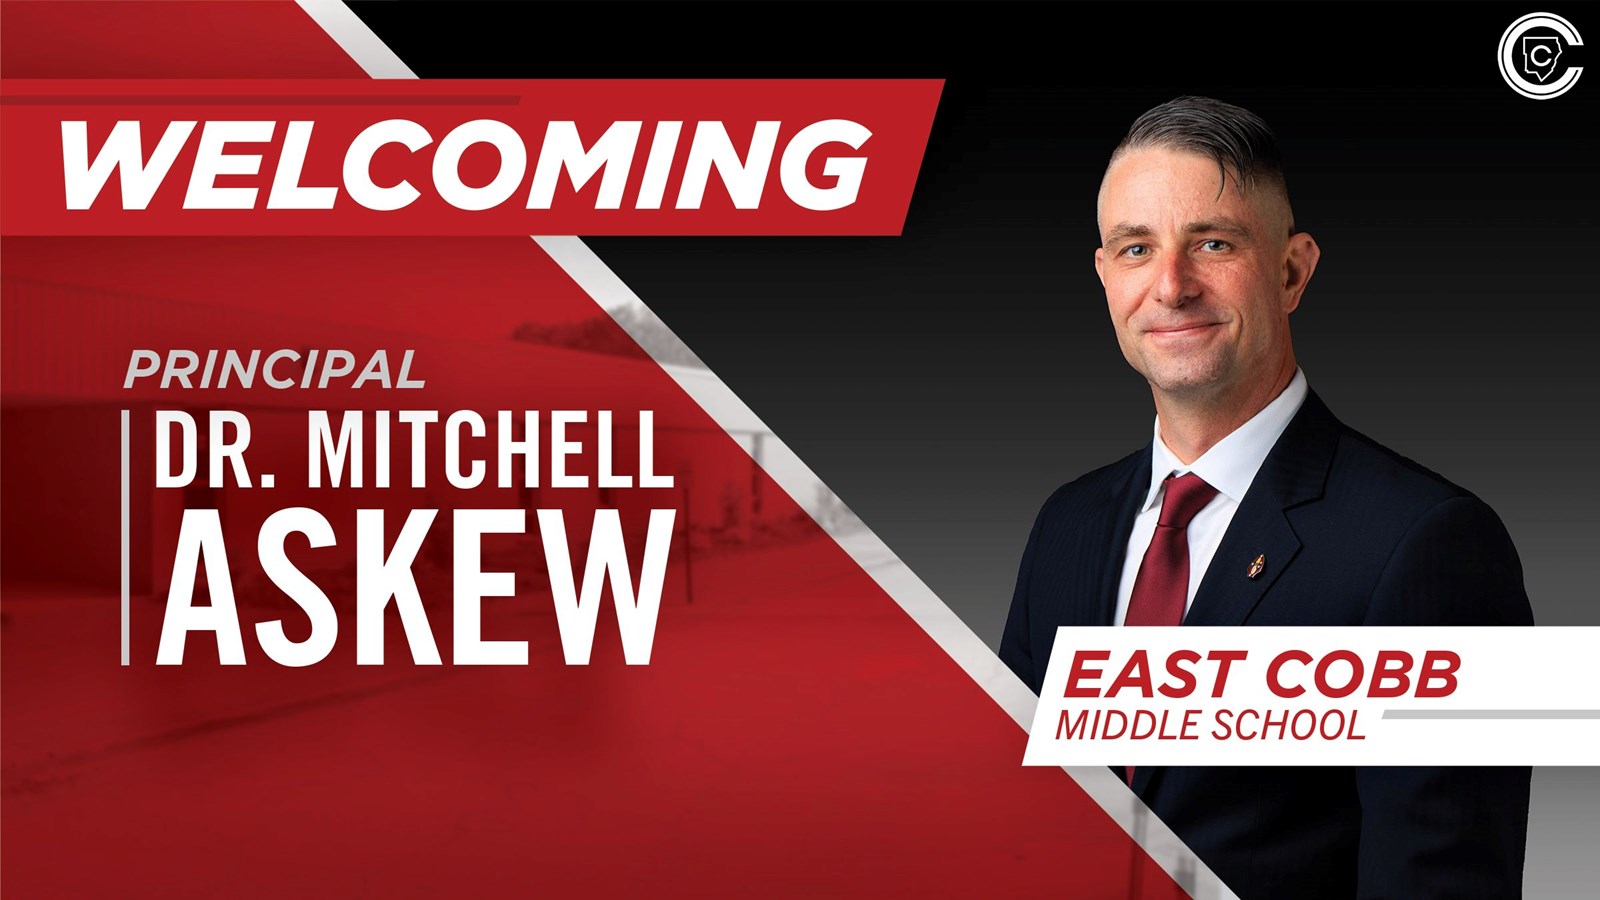 Dr. Mitchell Askew is the new principal of East Cobb Middle School.